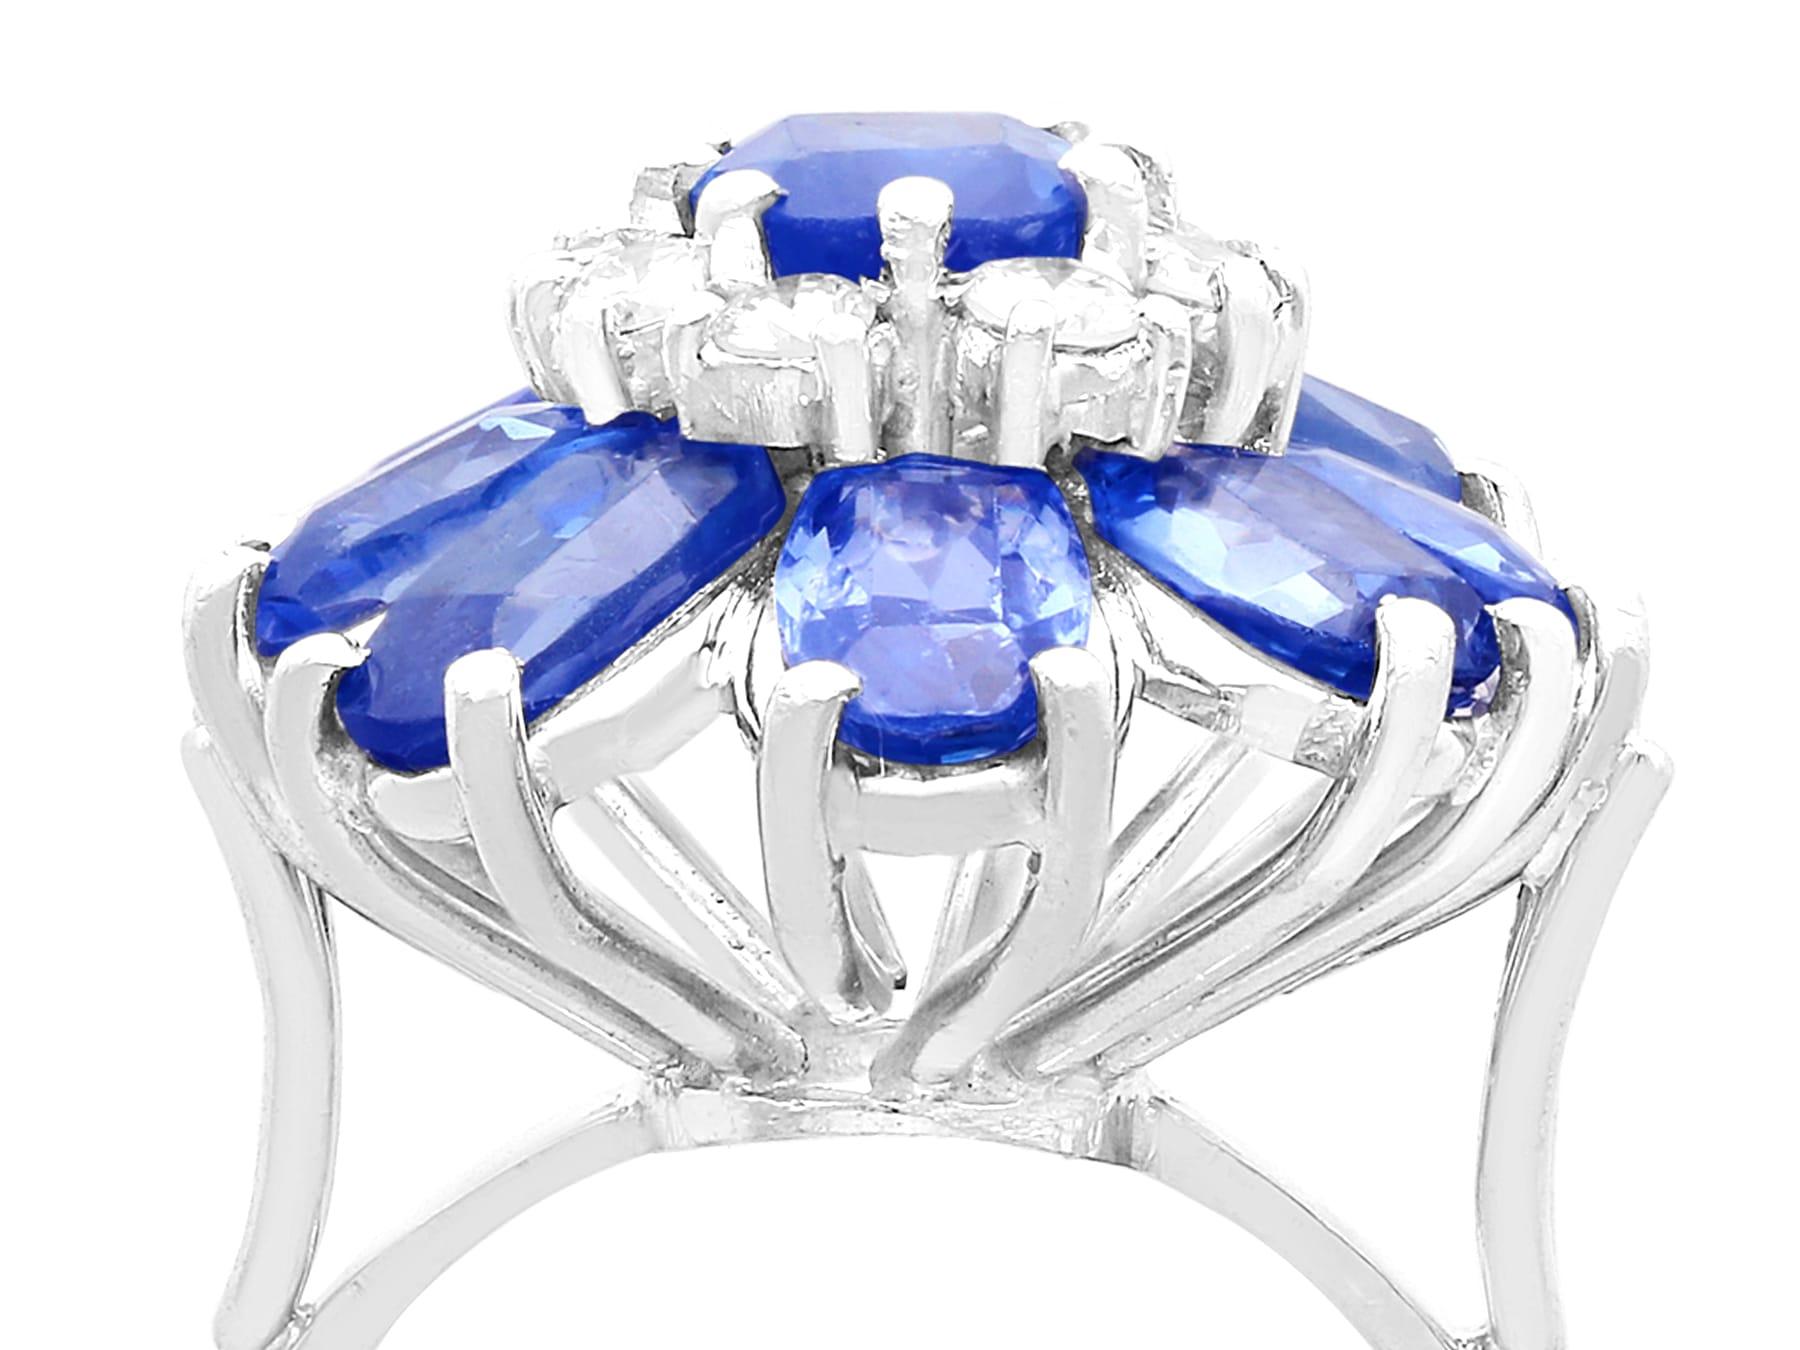 A fine and impressive 7.84 carat blue sapphire and 0.40 carat diamond, 18 karat white gold cocktail ring; part of our diverse vintage jewelry collections.

This fine and impressive vintage sapphire ring has been crafted in 18k white gold.

The